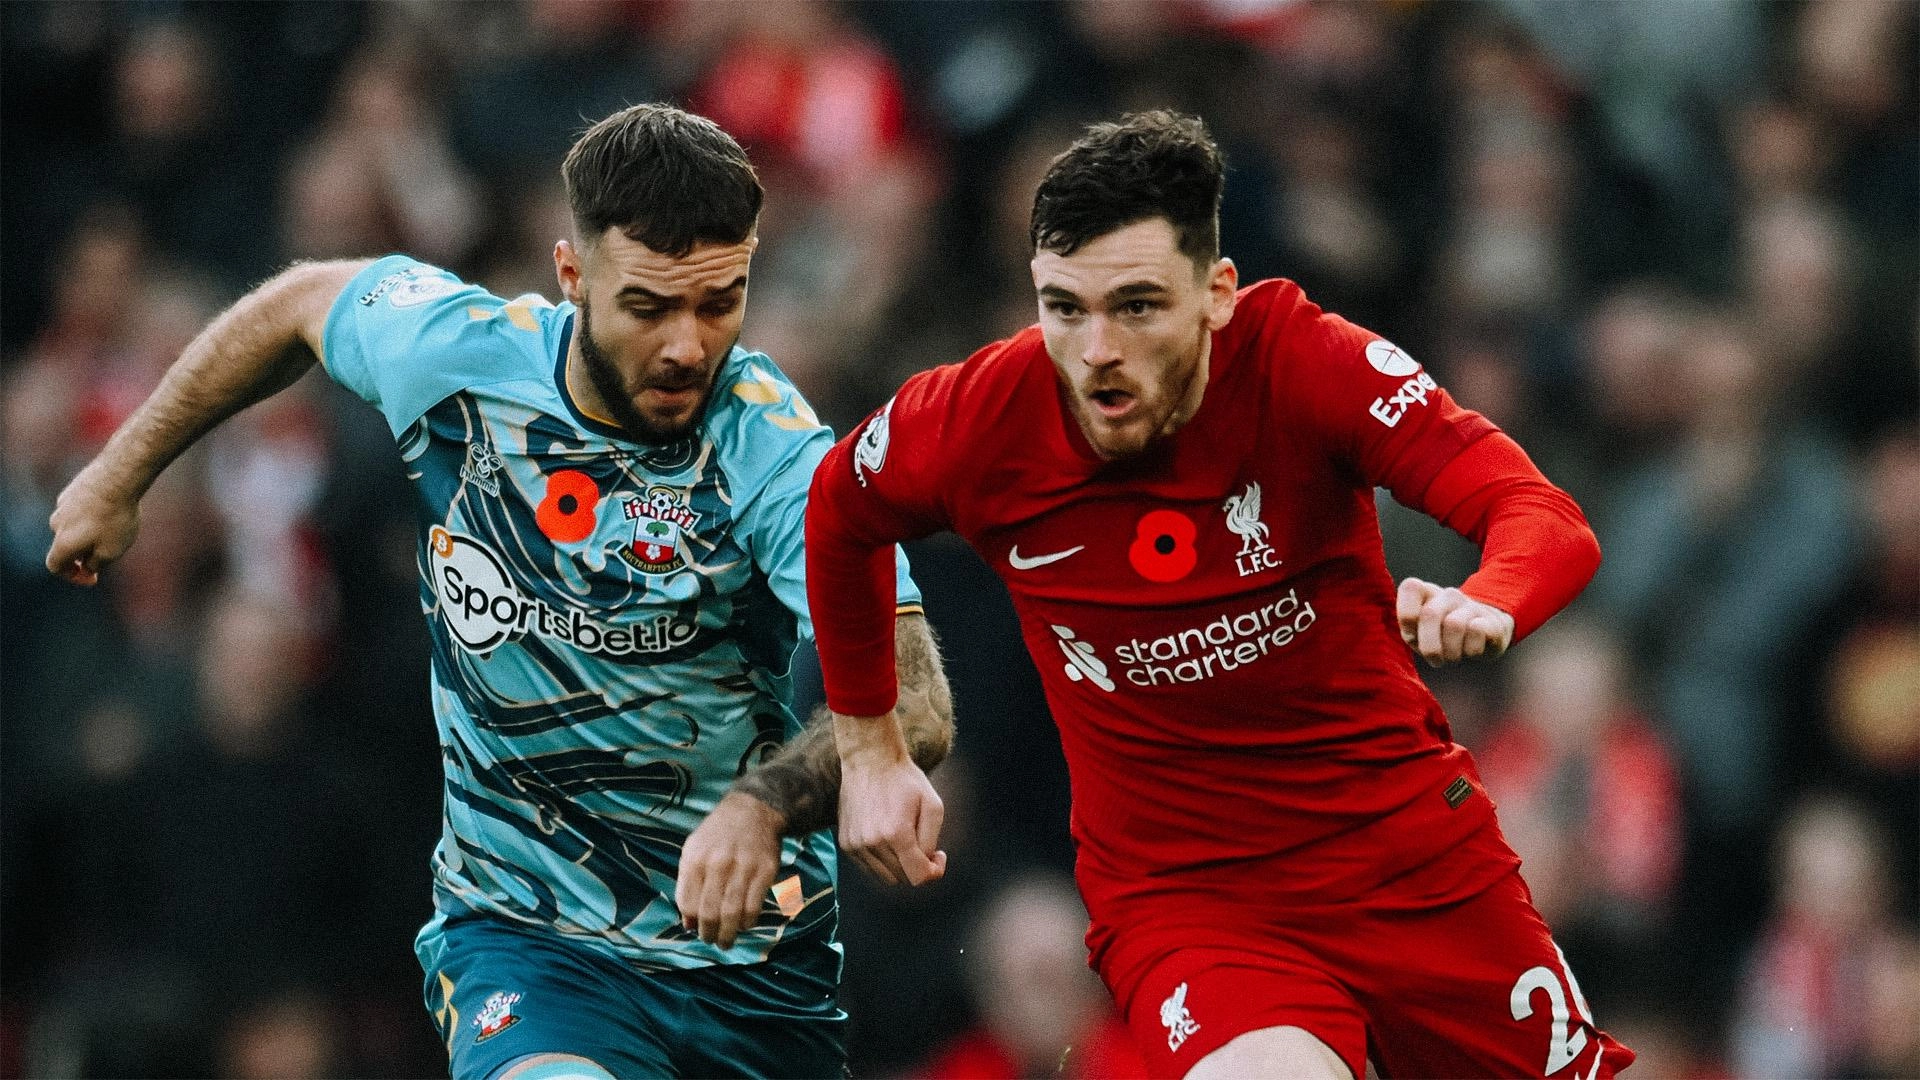 Competition Predict the score for Southampton v Liverpool